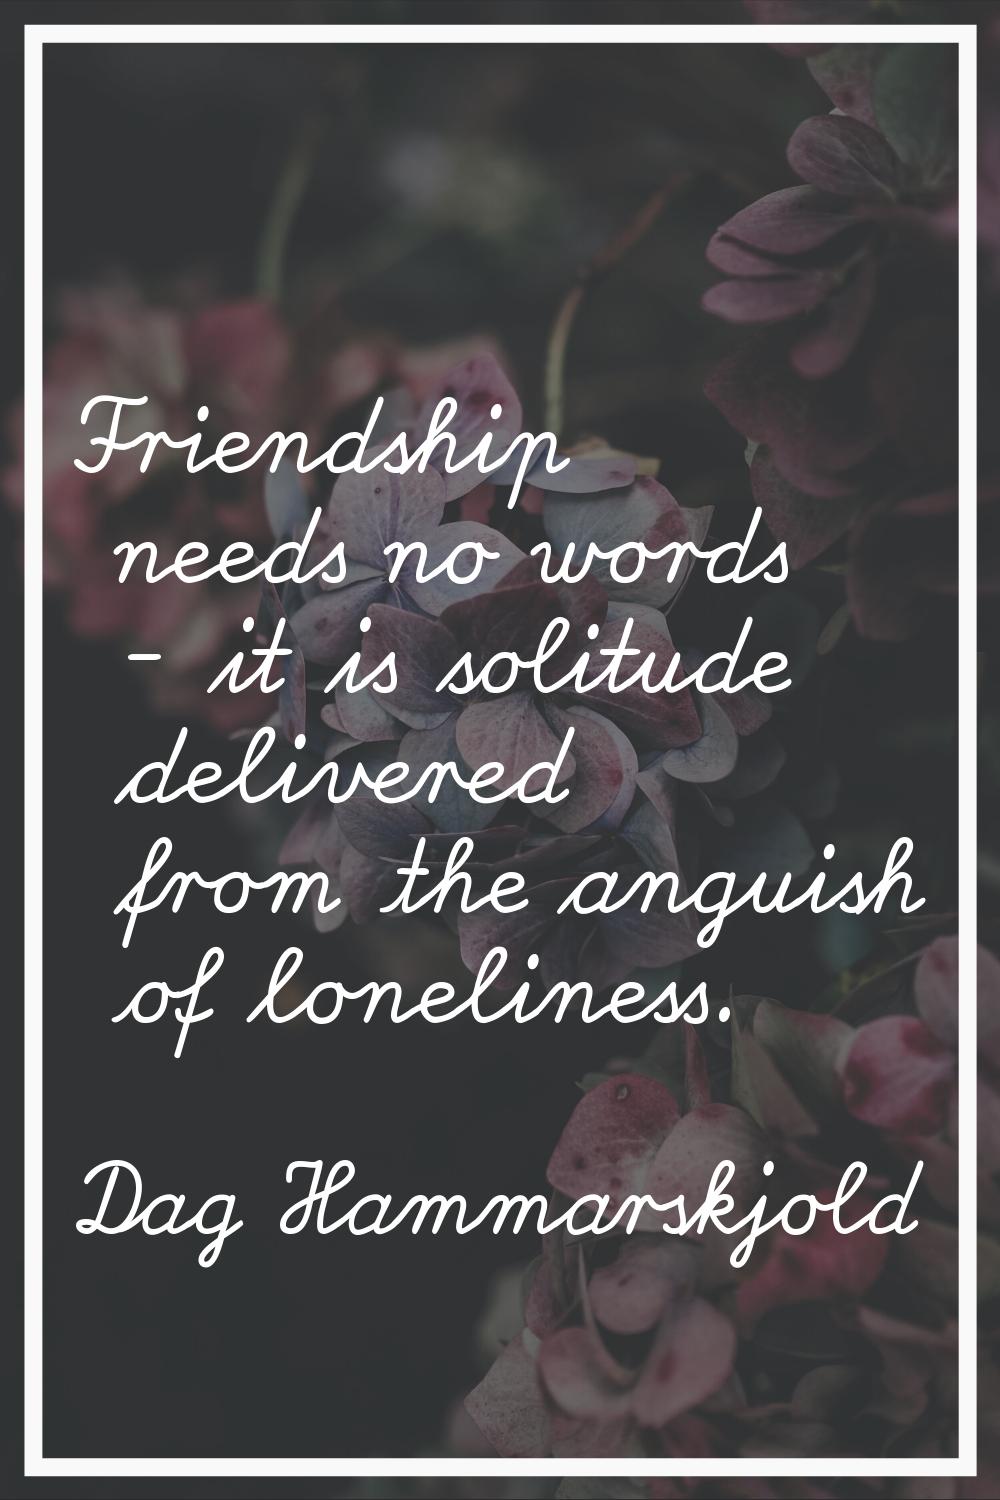 Friendship needs no words - it is solitude delivered from the anguish of loneliness.